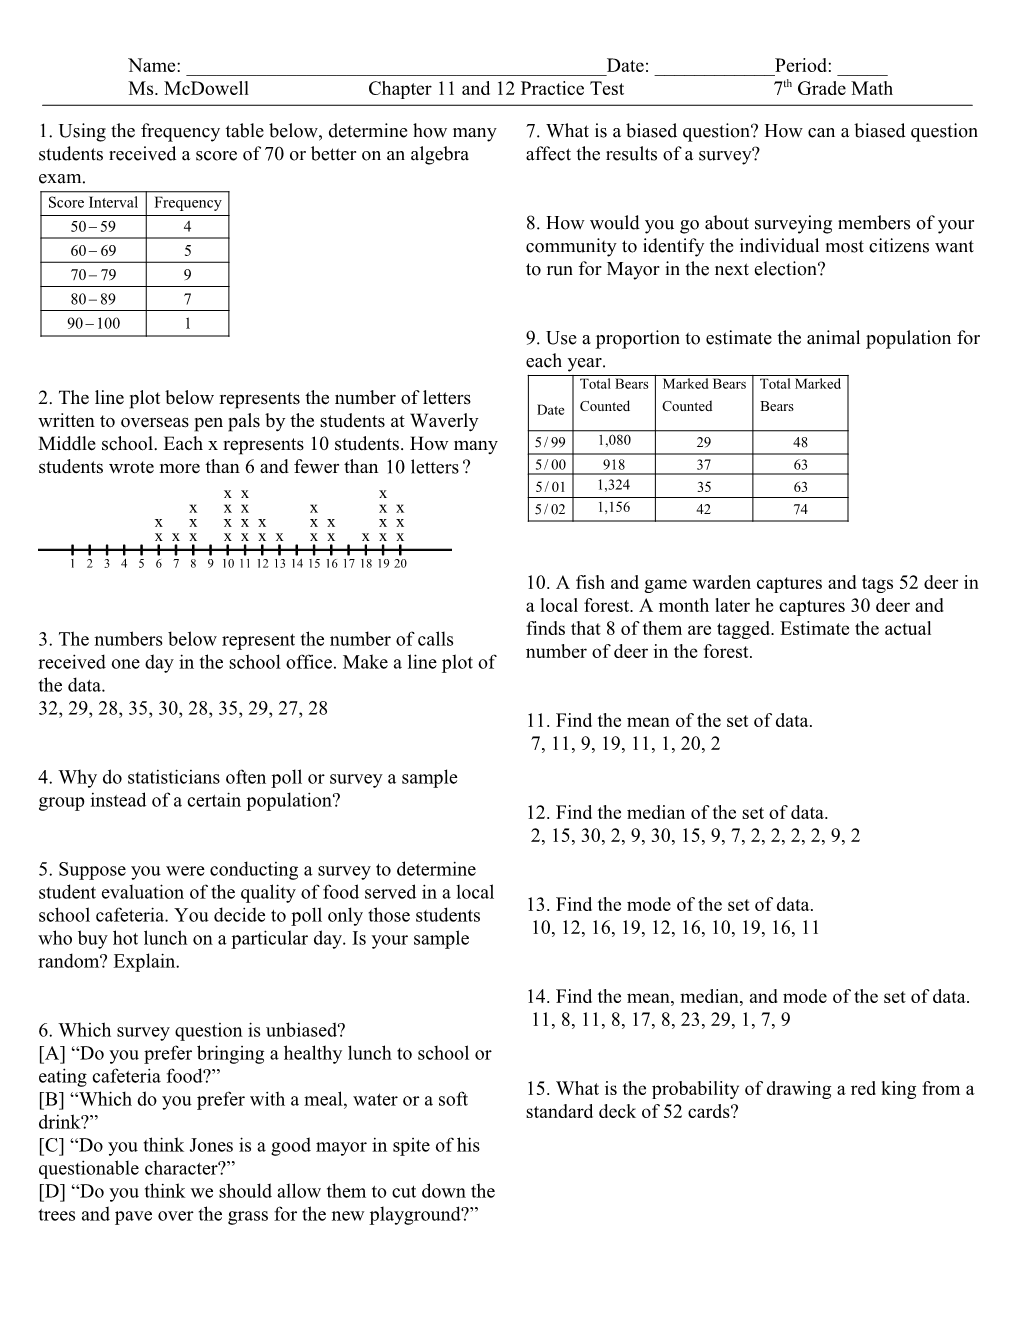 Ms. Mcdowellchapter 11 and 12 Practice Test 7Th Grade Math